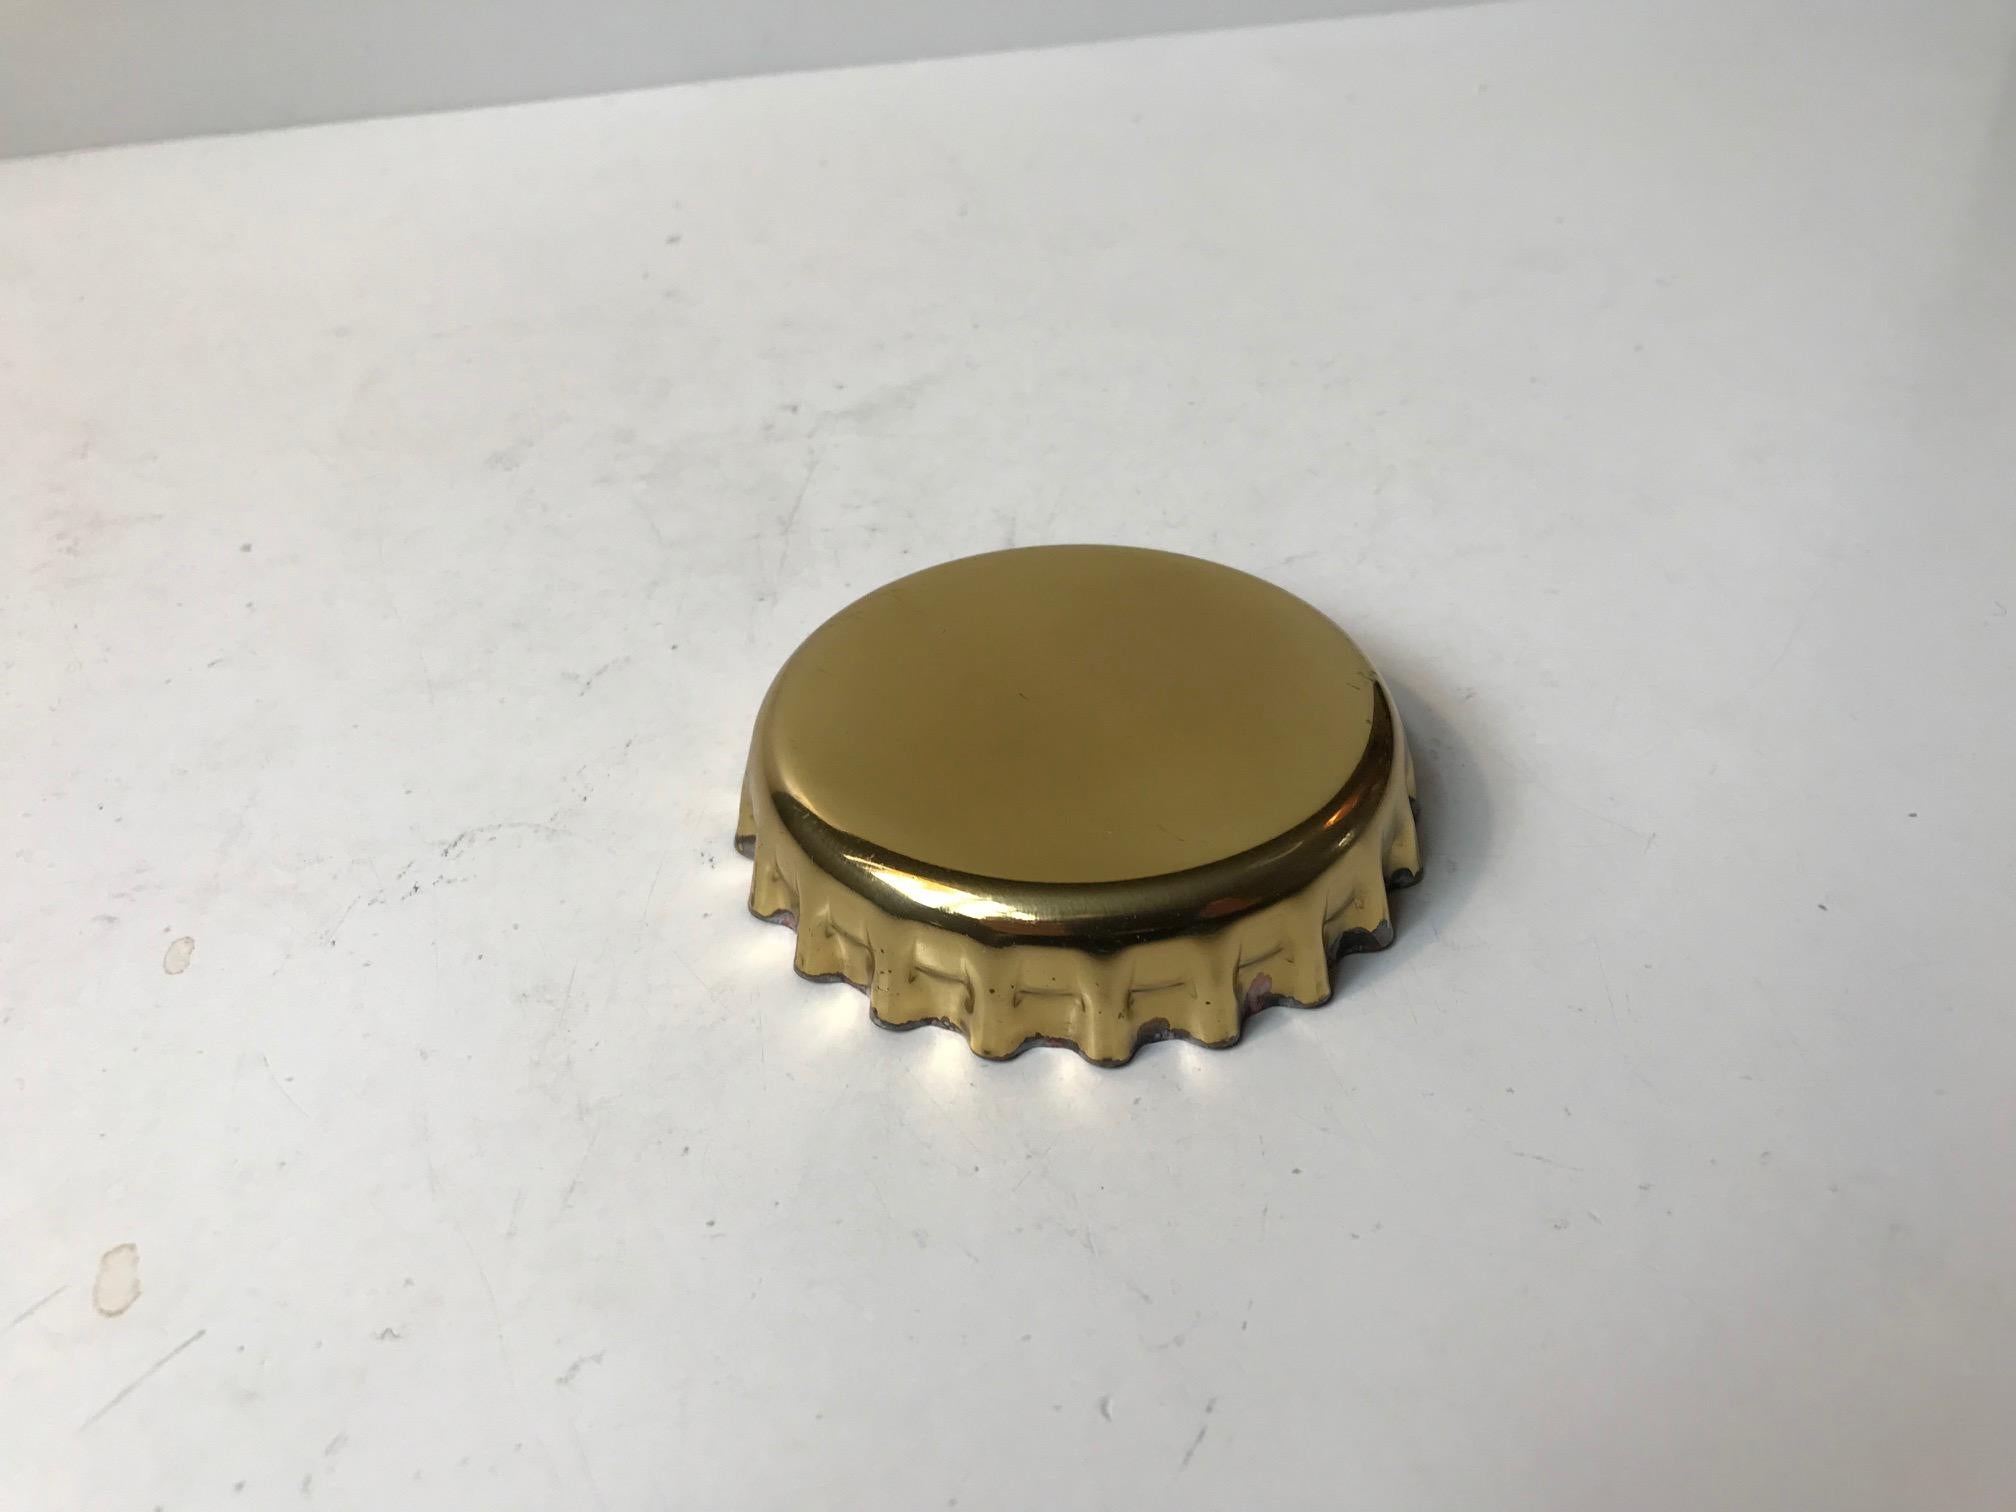 Manufactured in 1981 this curious bottle cap shaped opener is made from sculpted brass with a 'opener' mechanism in stainless steel. It is signed to the inside: Georg Jensen Design, Denmark, 1981.